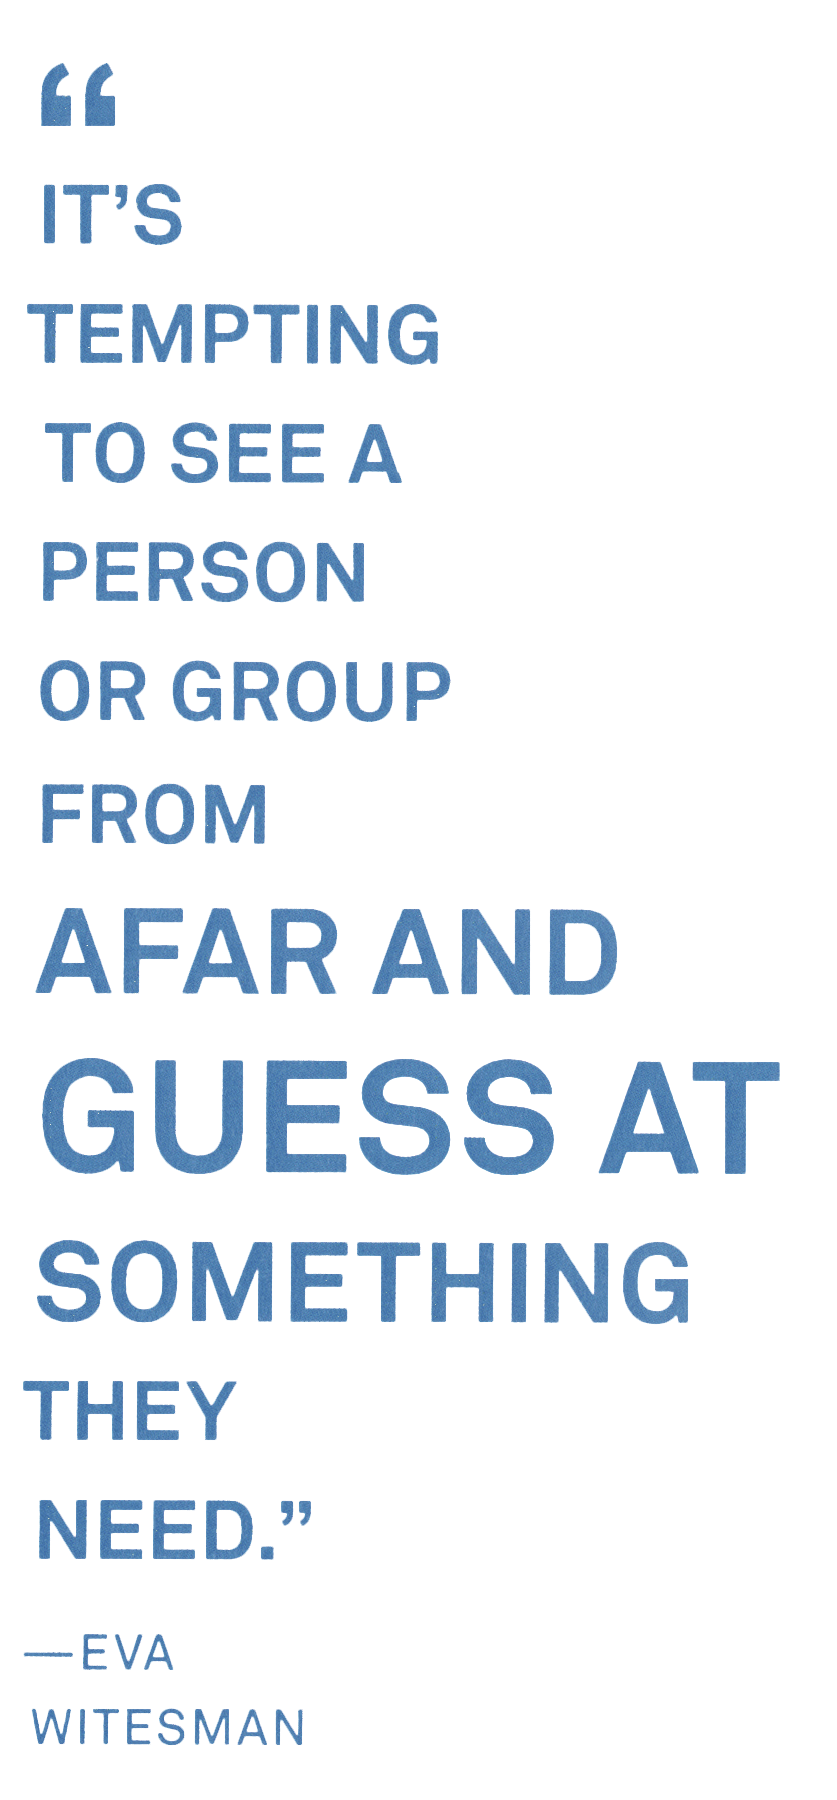 Pull quote: "It can be tempting to see a person or group from afar and guess at something they need." —Eva Witesman